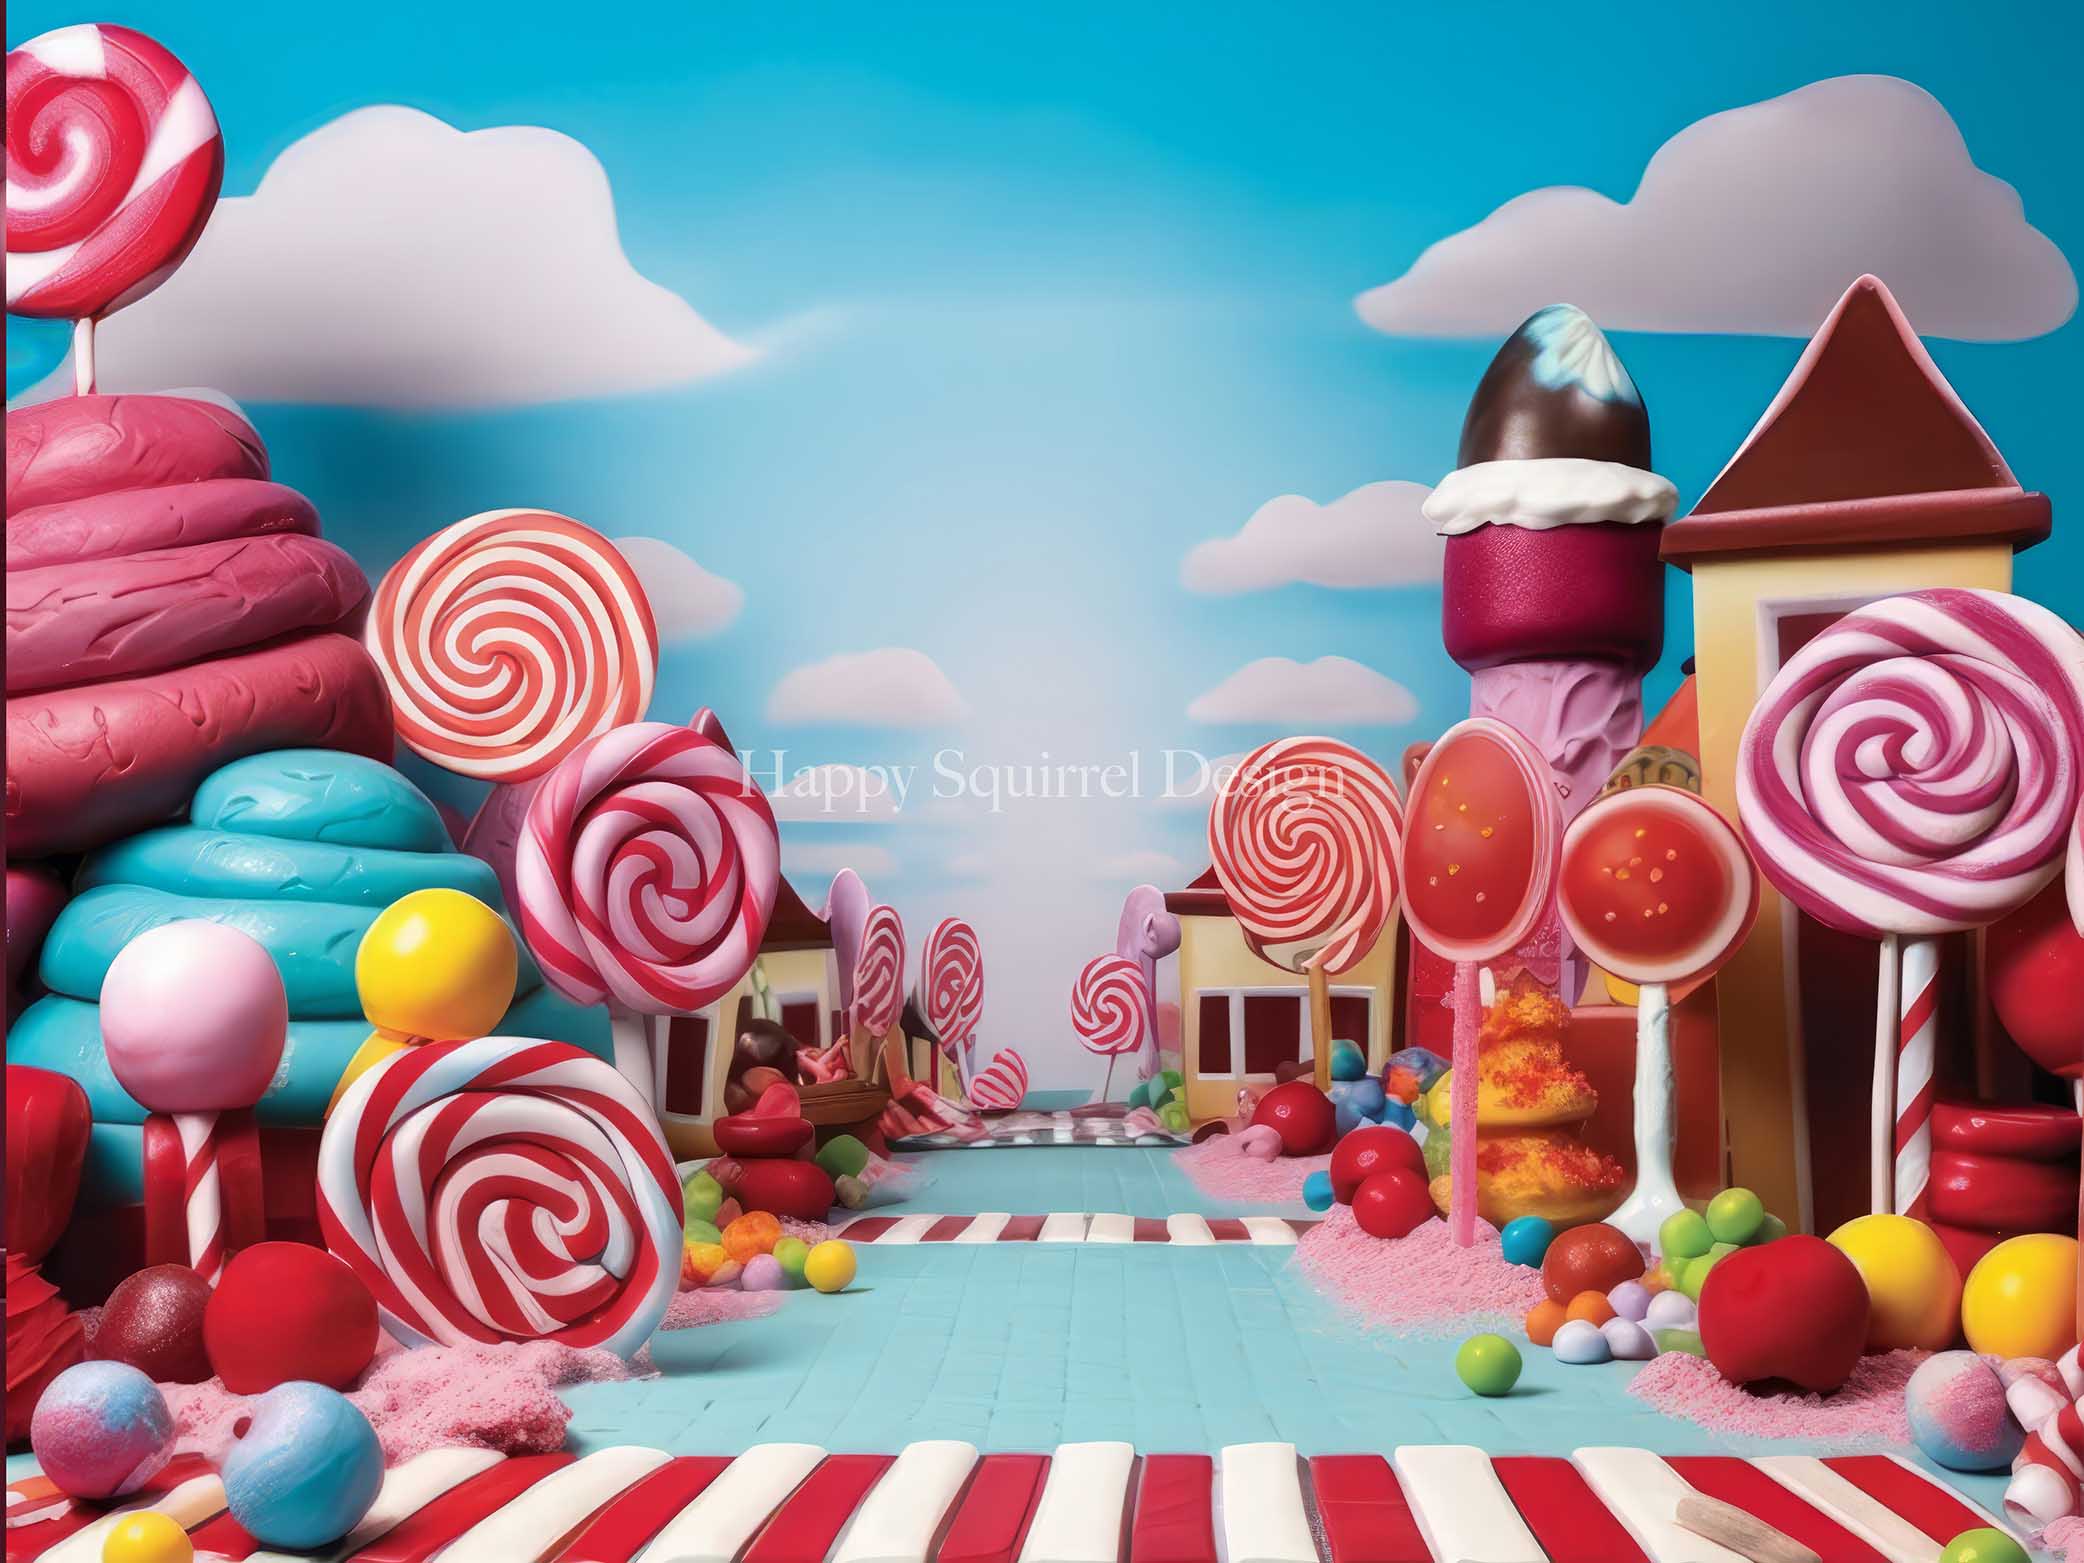 Kate Holiday Candy Path Backdrop Designed by Happy Squirrel Design